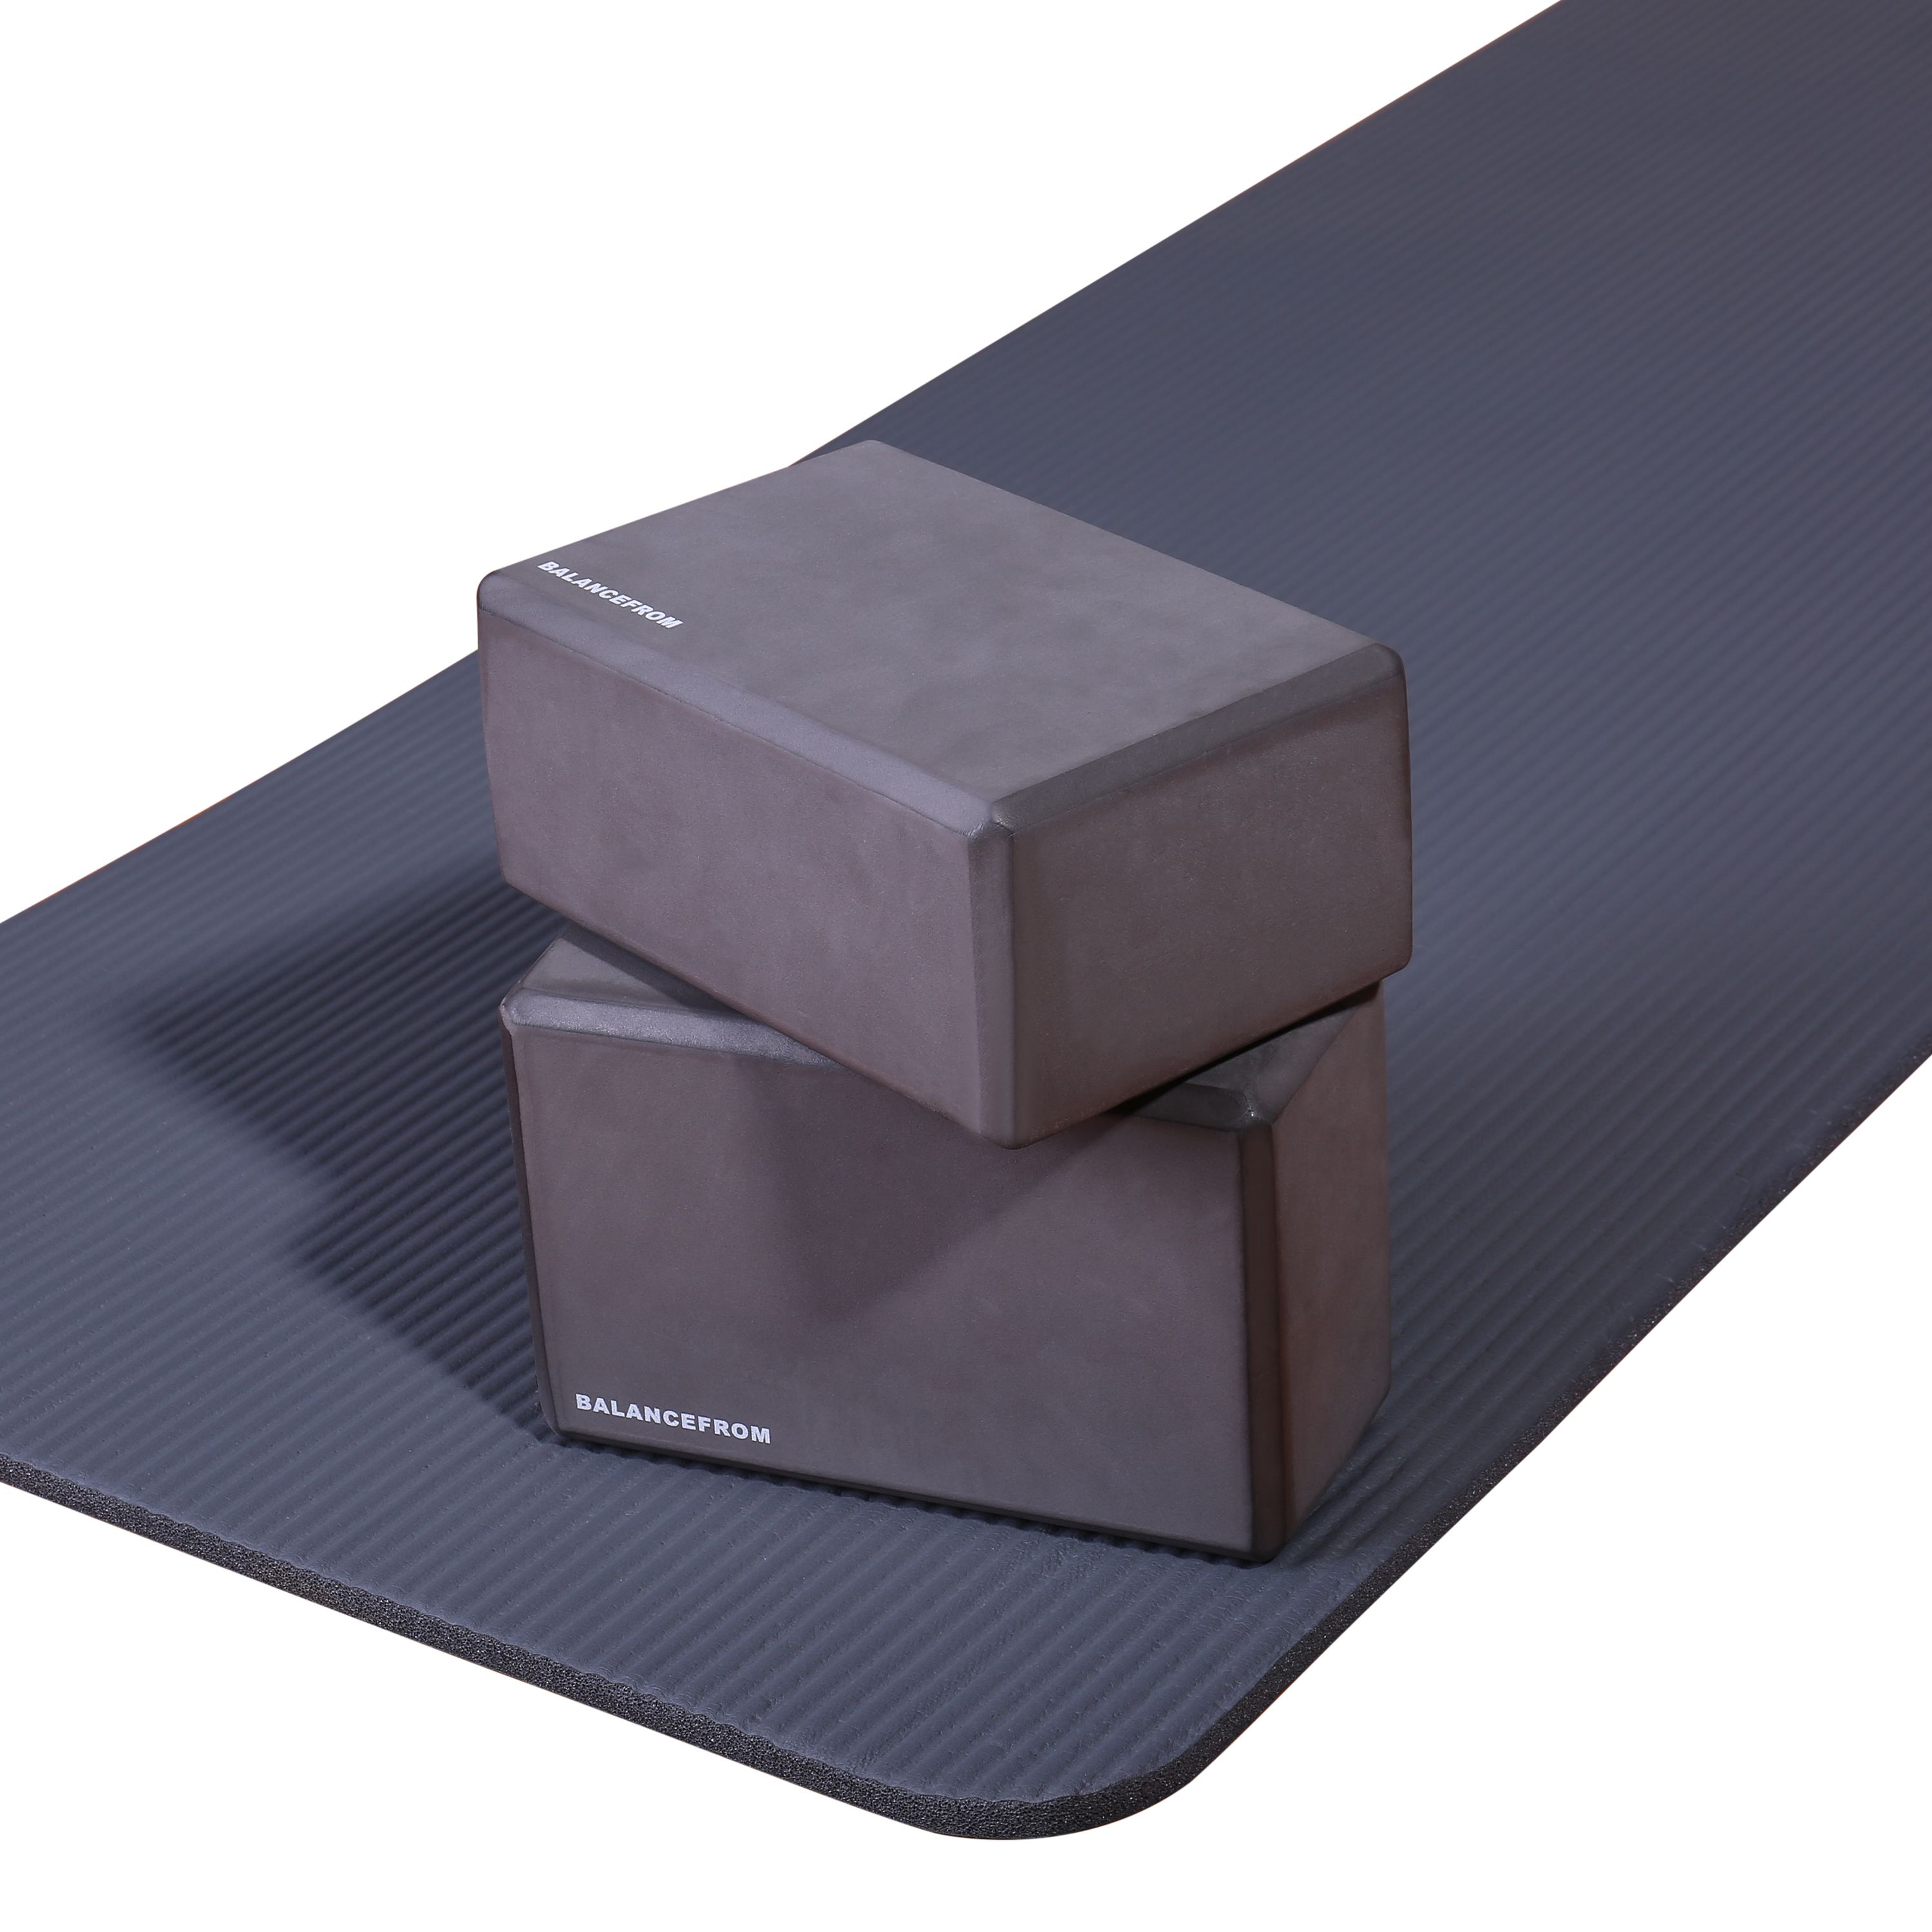 BalanceFrom All-Purpose 1/2 In., High Density Foam Exercise Yoga Mat Anti-Tear with Carrying Strap, Gray - image 3 of 5